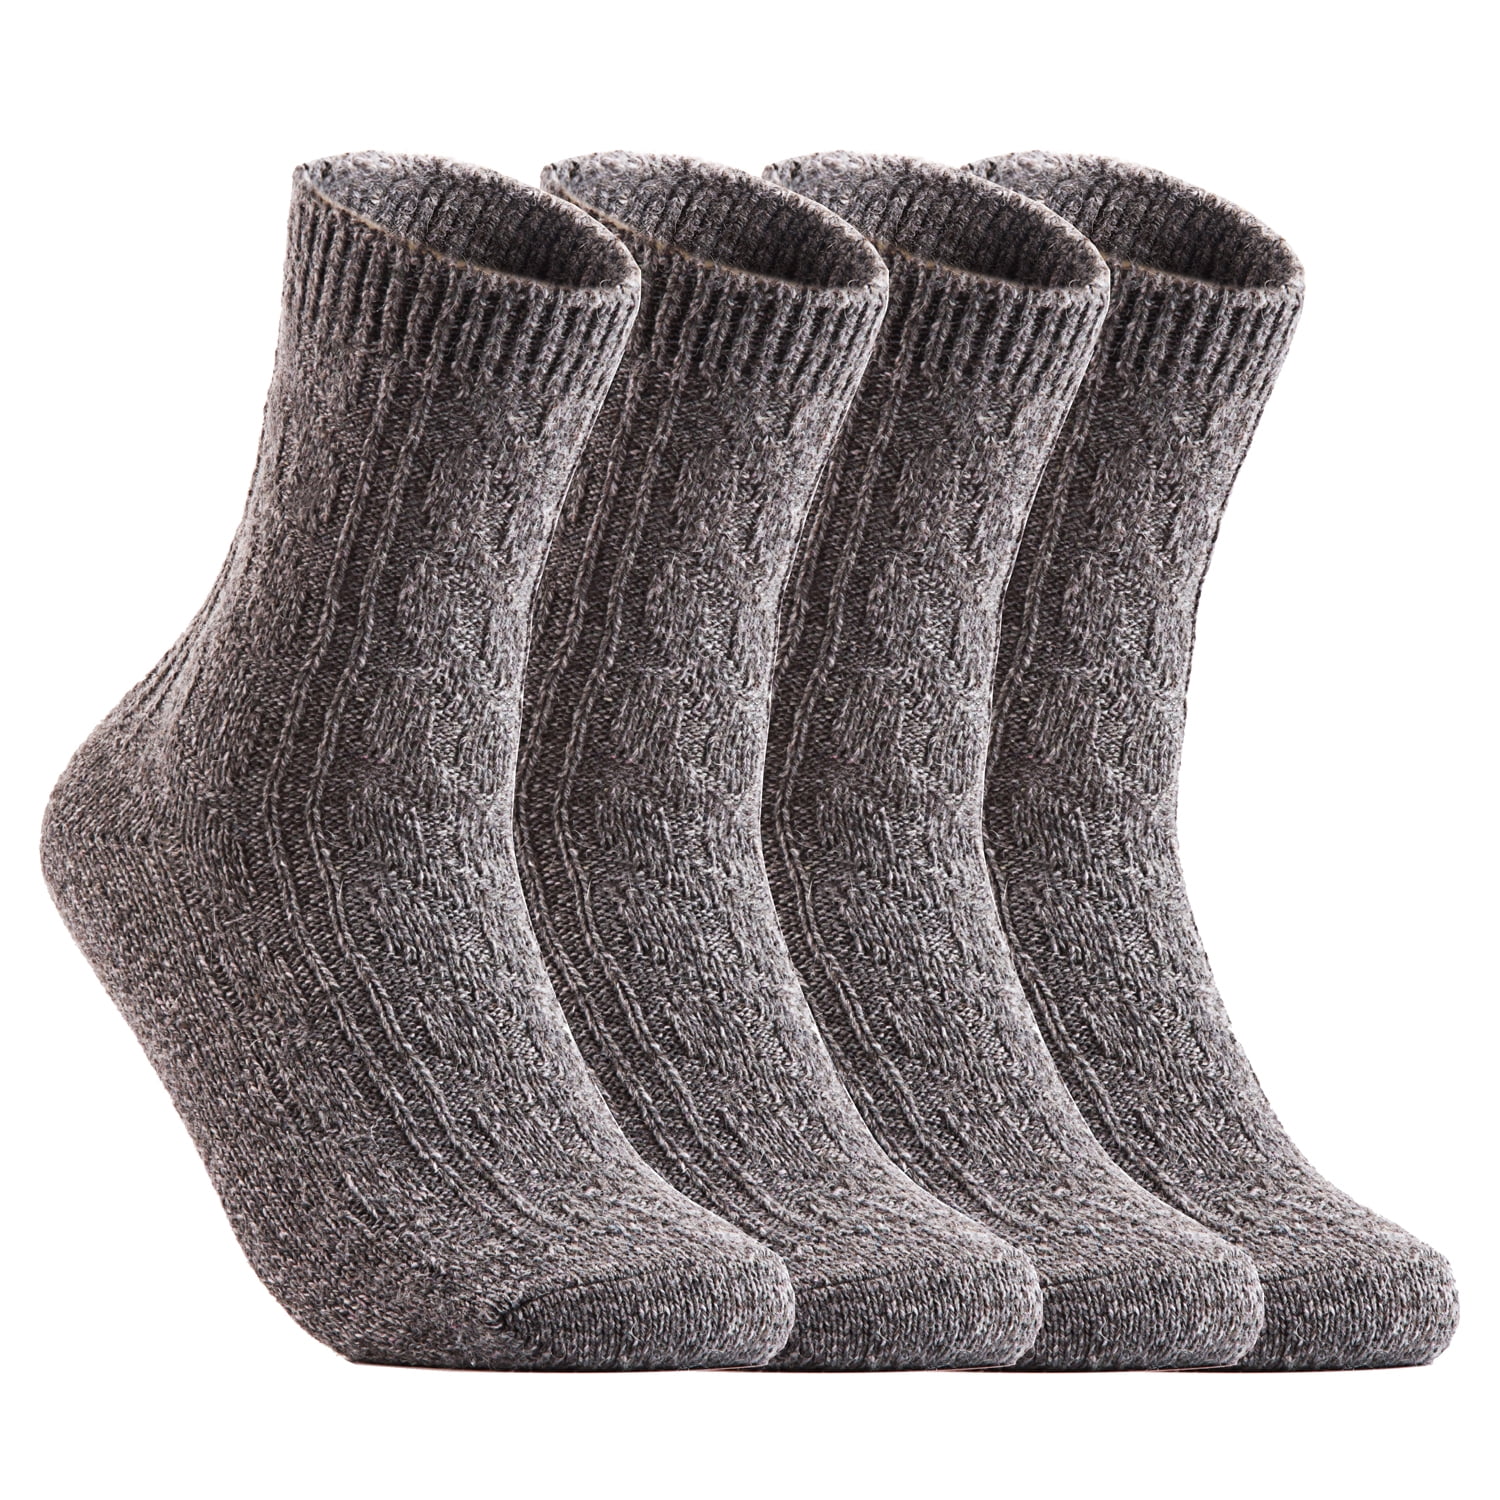 Henny Rue - Lovely Annie Women's 4 Pairs Pack Fashion Soft Wool Crew ...